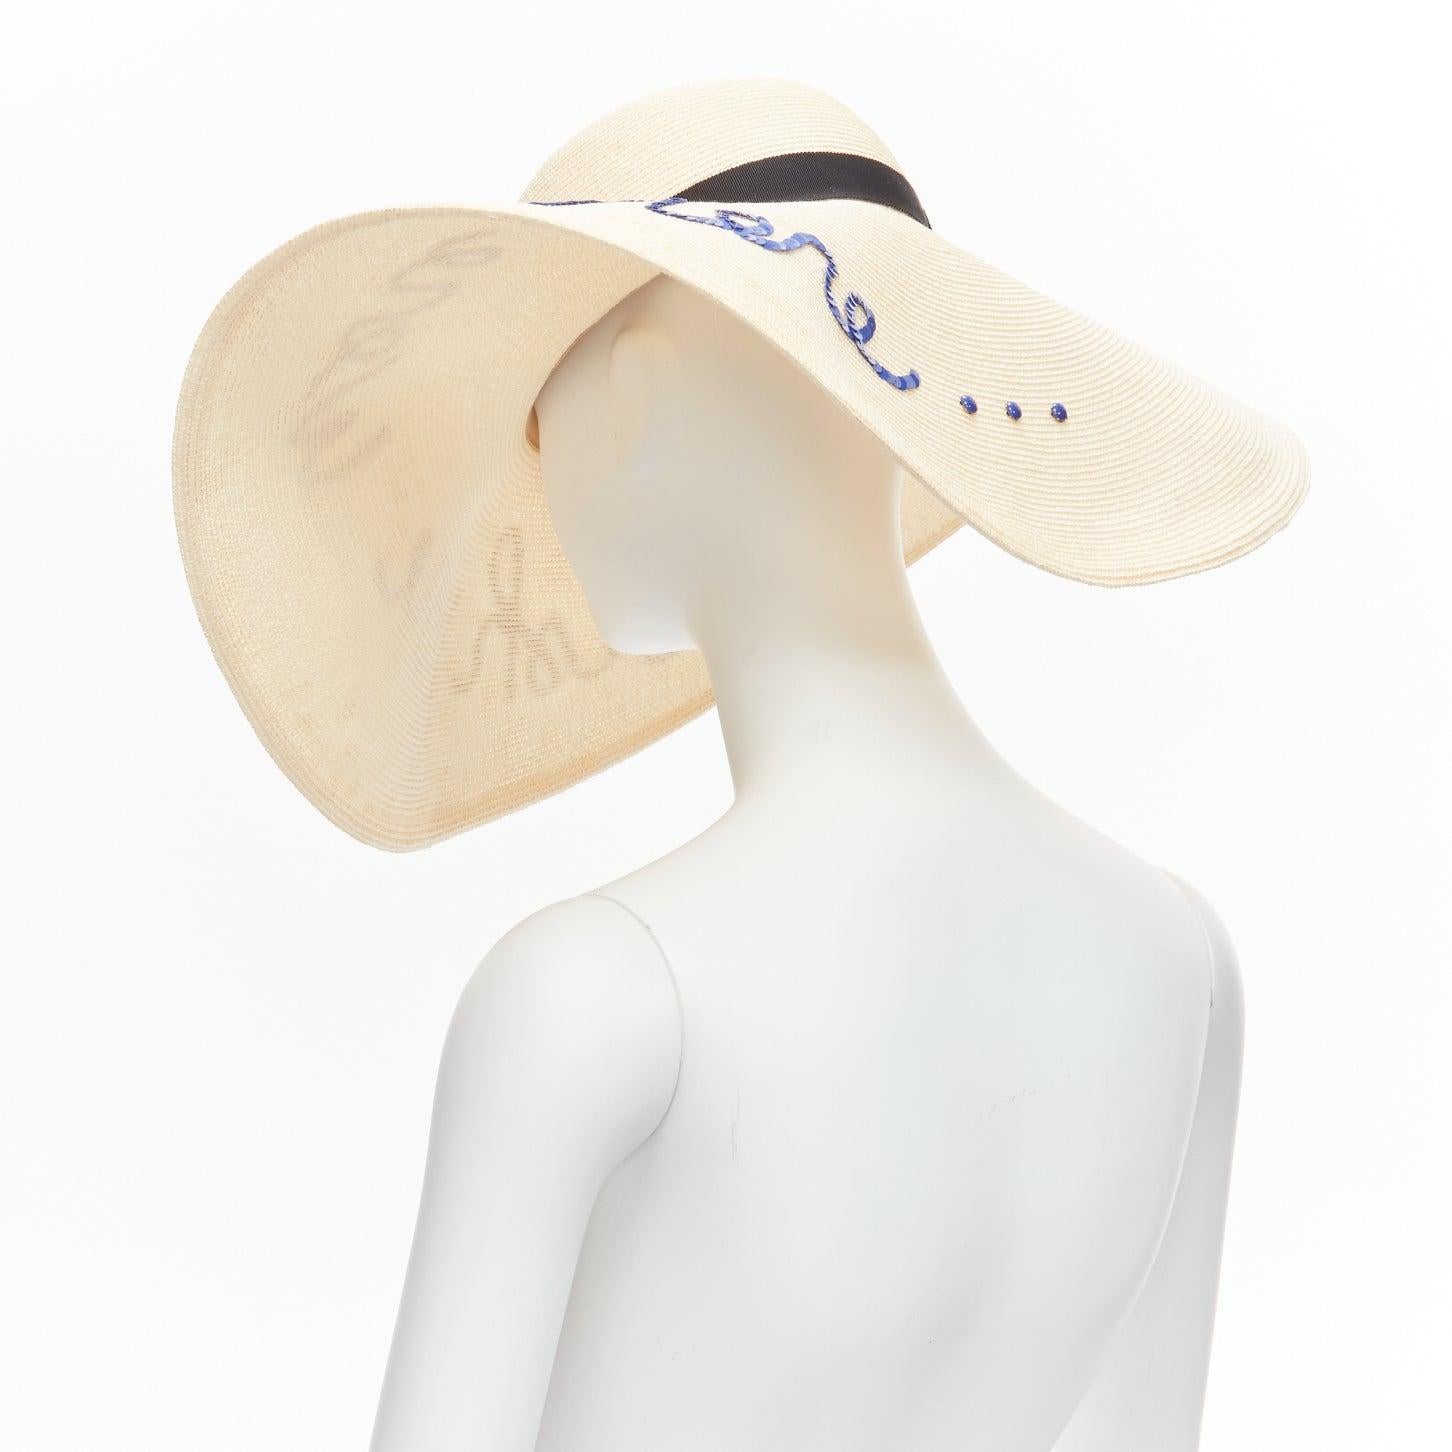 EUGENIA KIM blue sequins Wish You Were Here beige toyo paper cotton sun hat For Sale 1